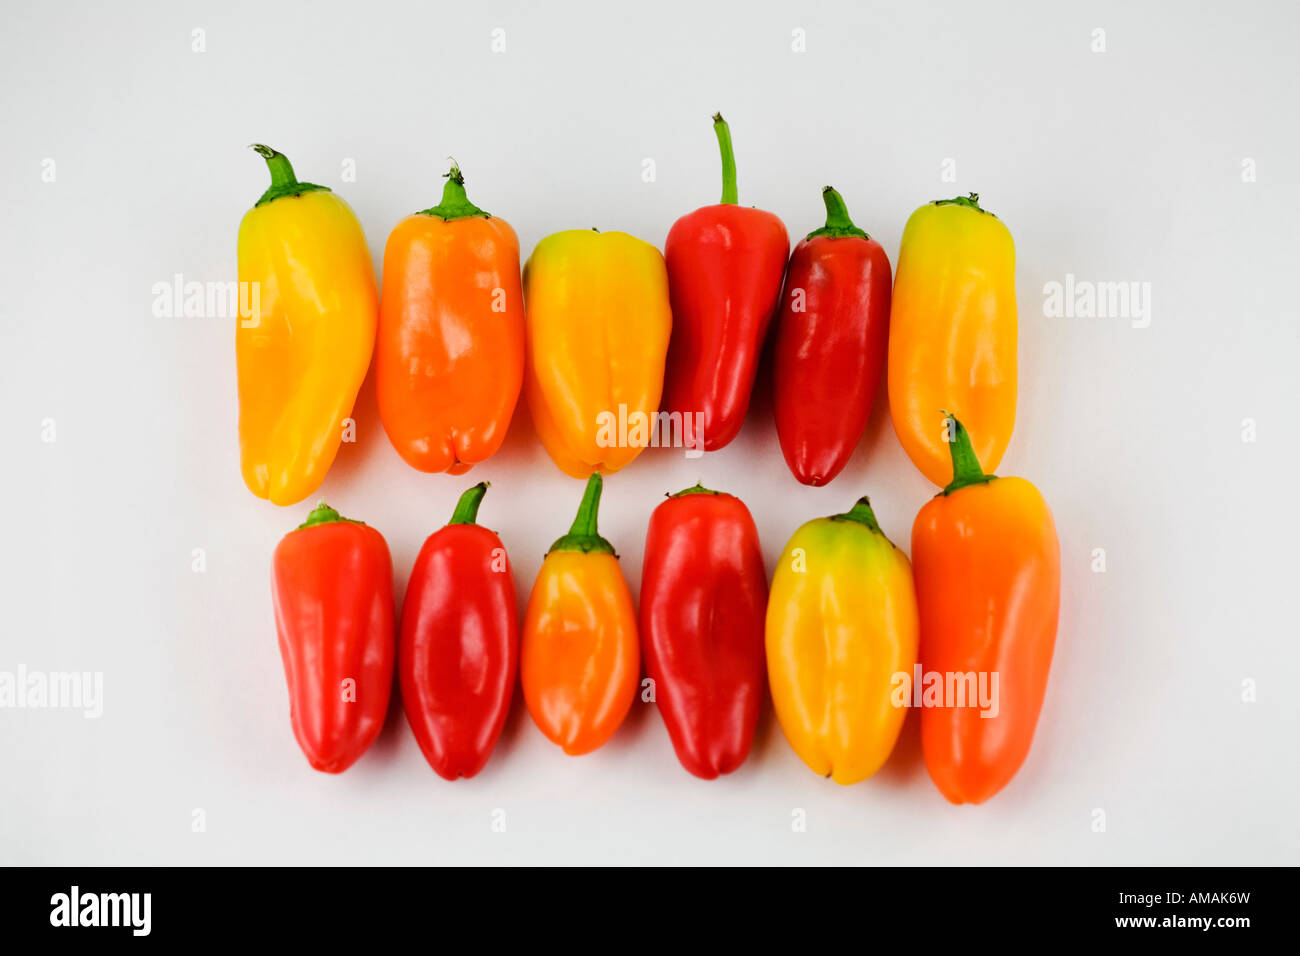 Red, yellow and orange peppers Stock Photo